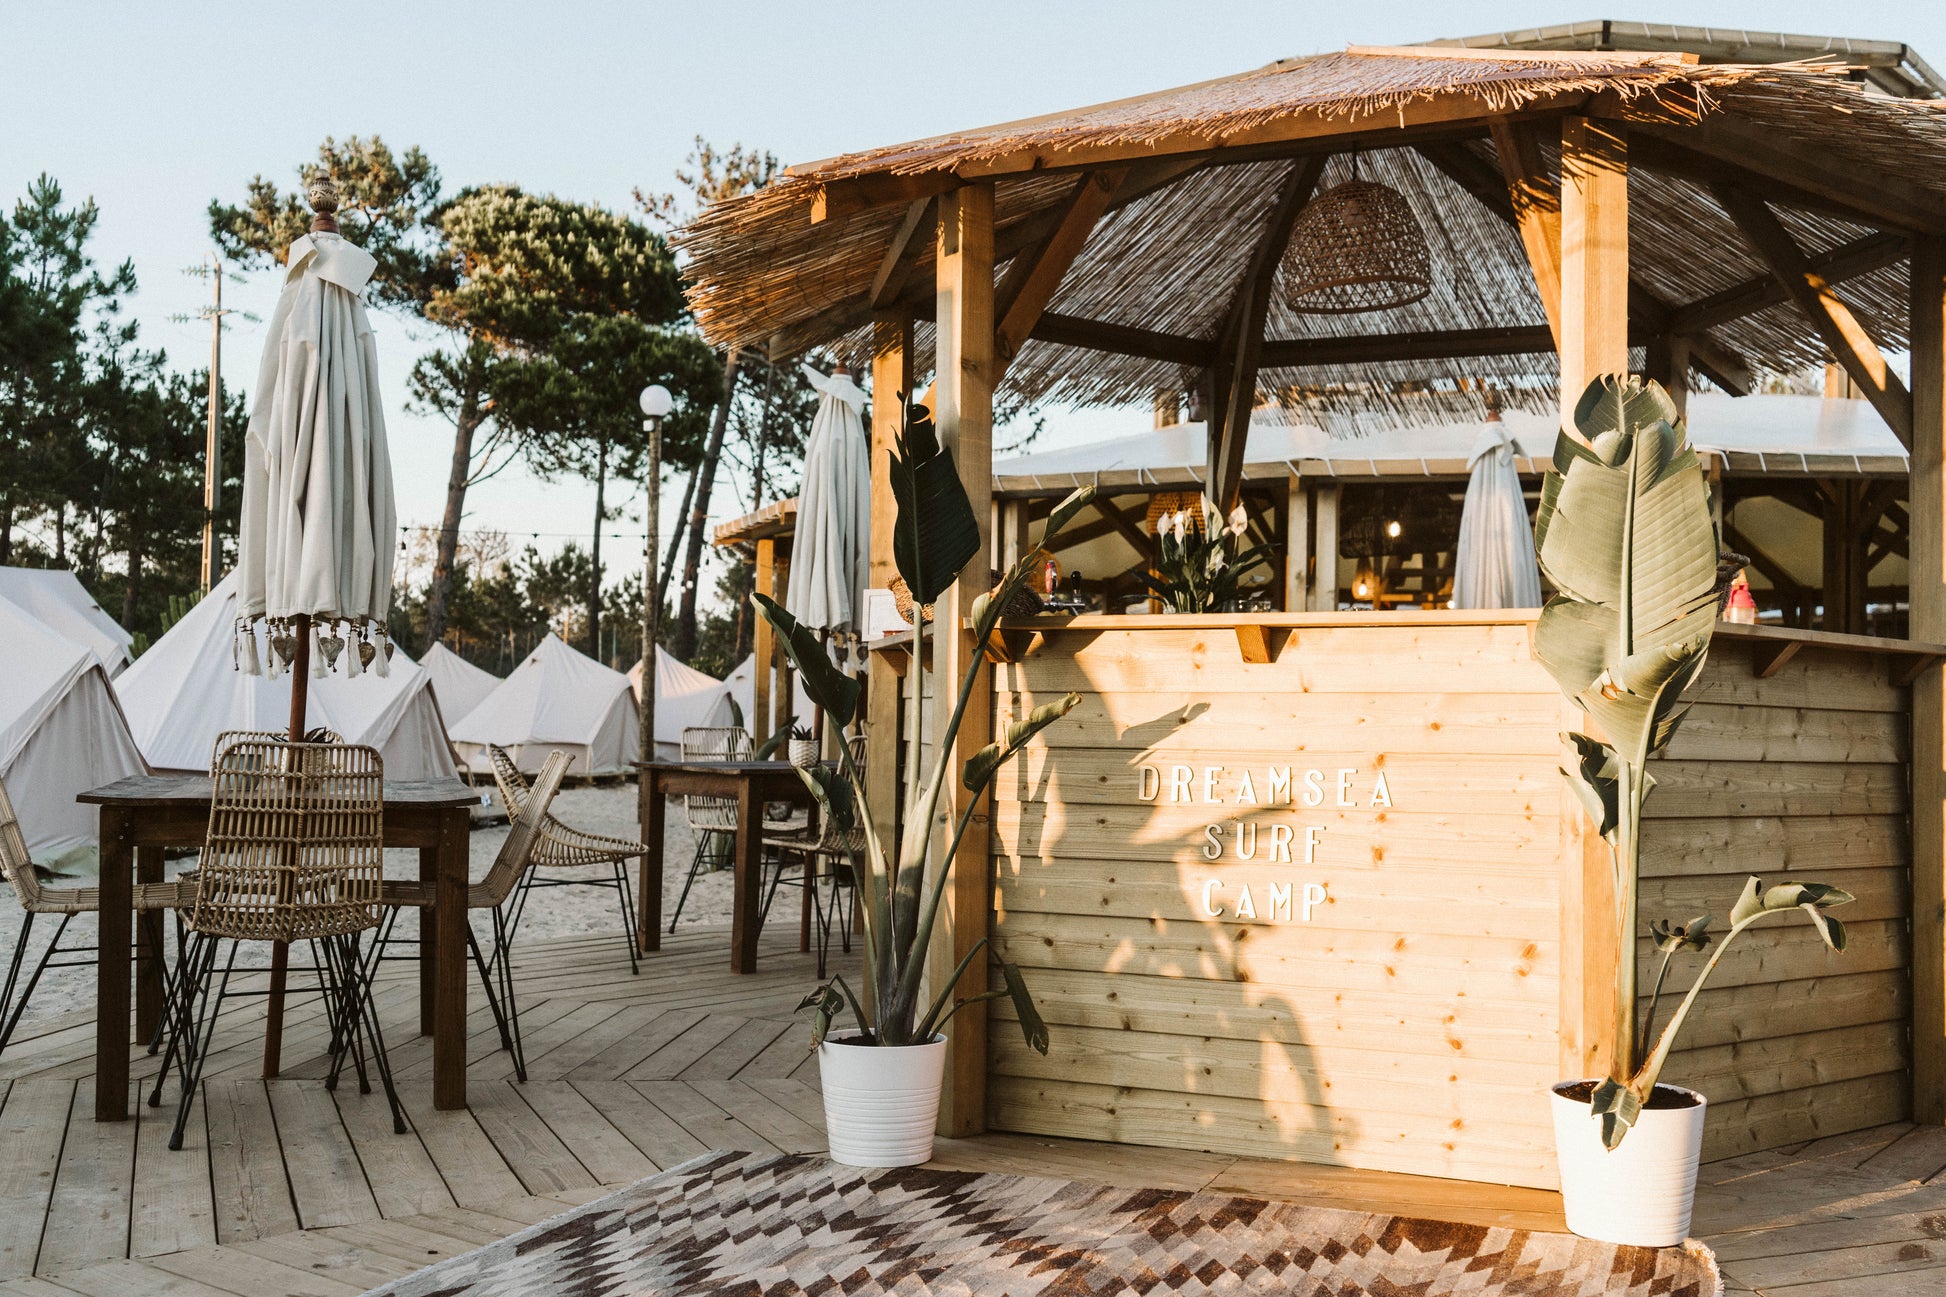 Outdoor seating and wooden bar canopy at the Dreamsea Surf Camp accommodation in Portugal for small group travel.